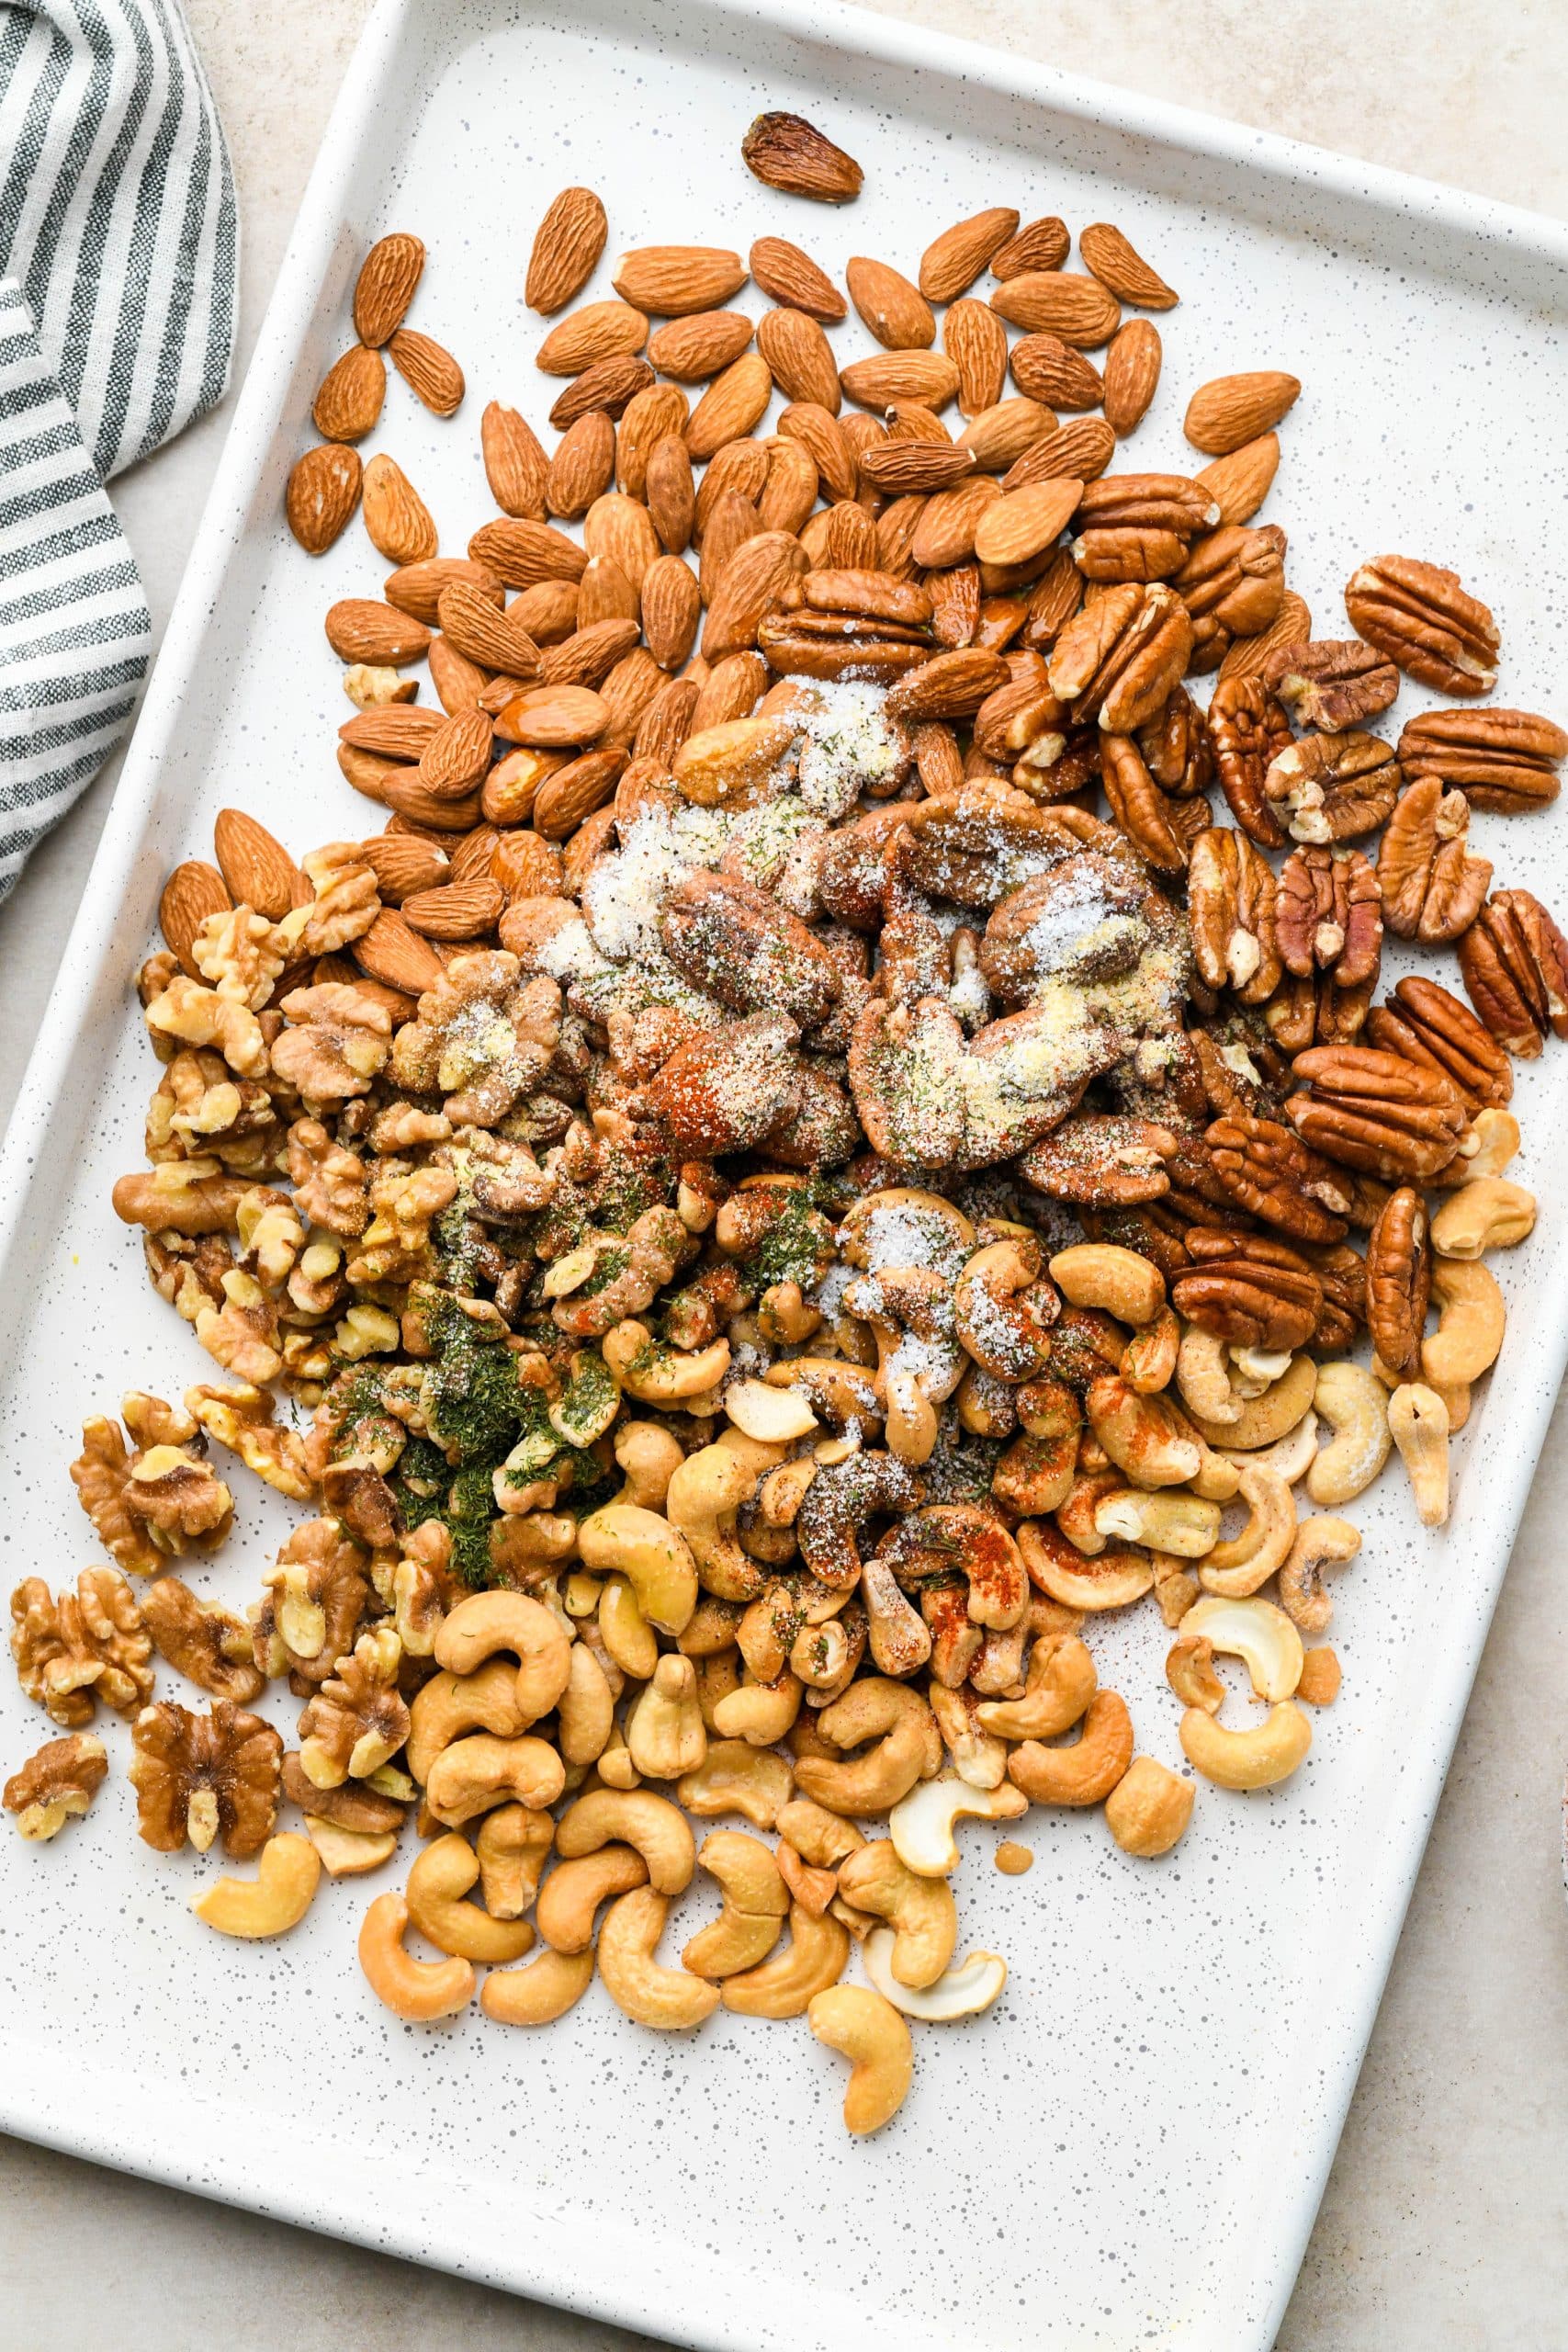 How to make Spiced Roasted Nuts: Mixed nuts topped with olive oil and dried spices.